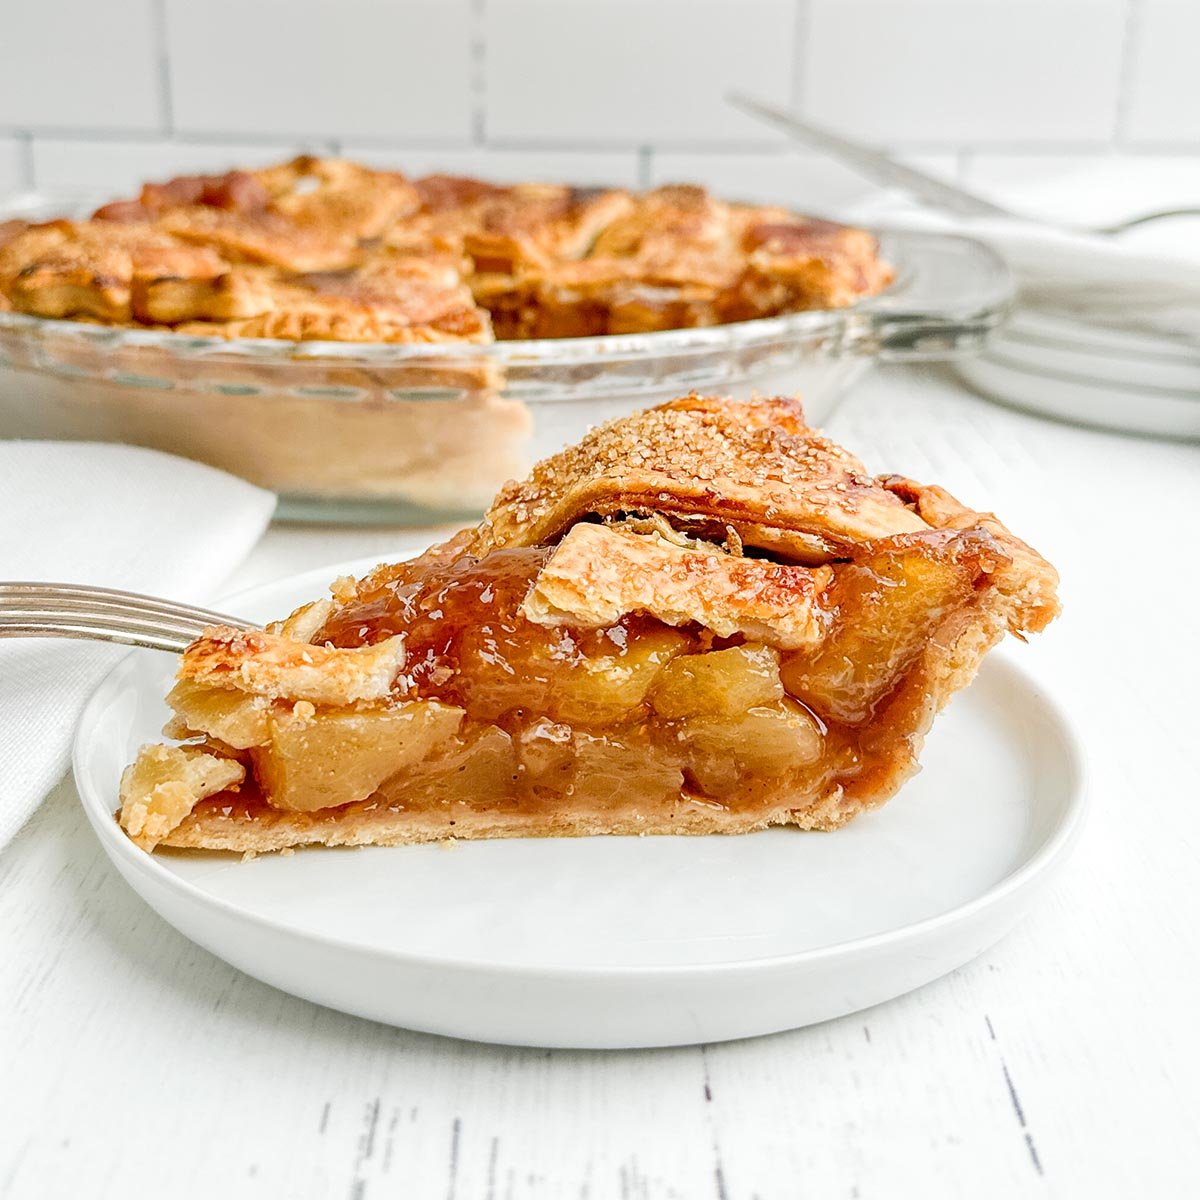 Side view of a piece of apple pie.